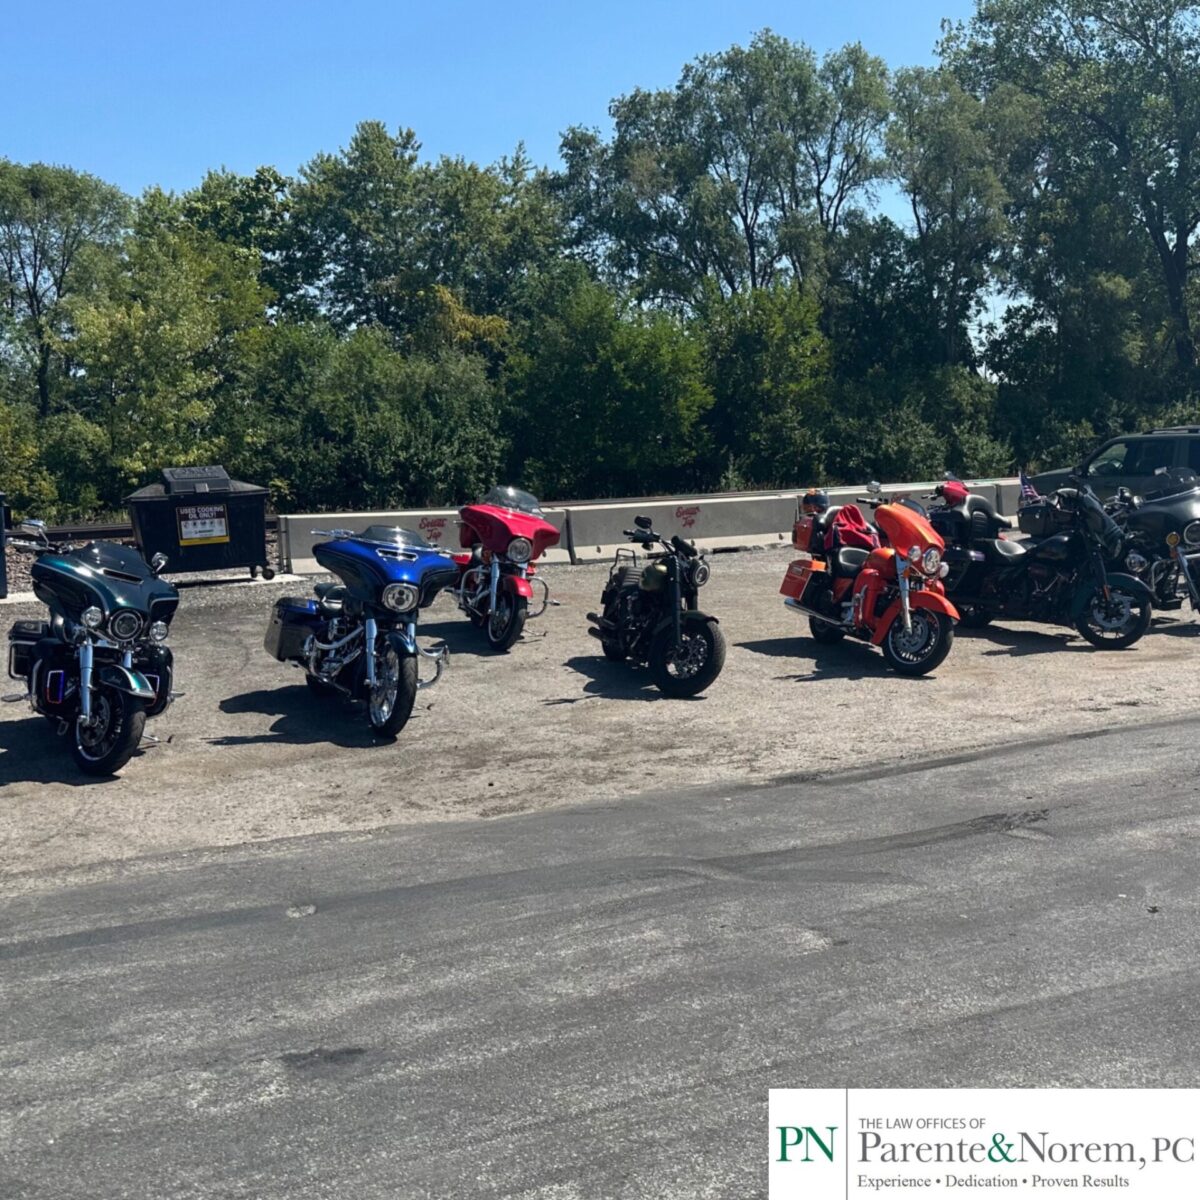 P&N BLOG | The Law Offices of Parente & Norem, P.C. Supports IUOE 150 Bike & Classic Car Run